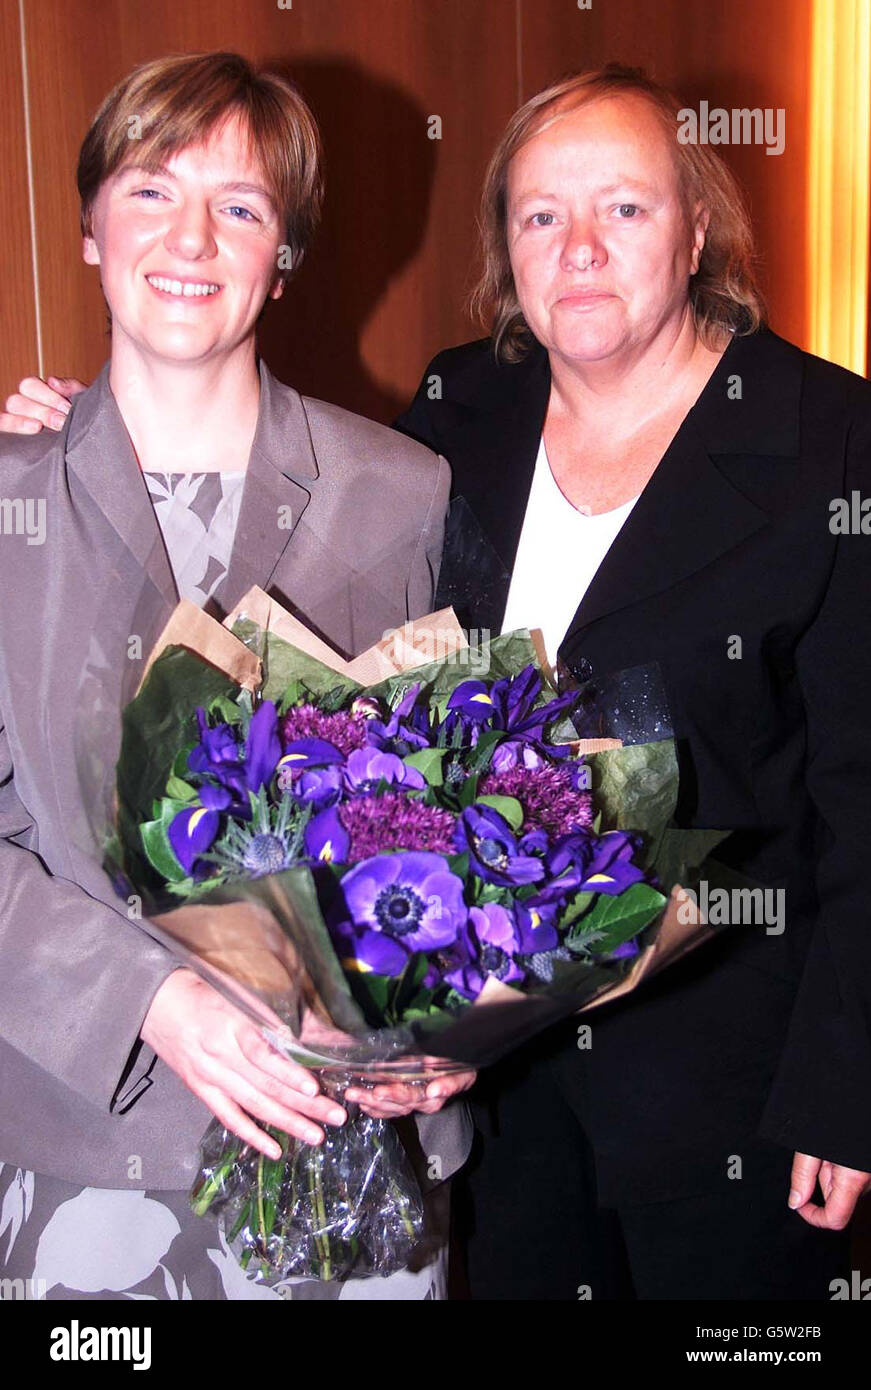 Former Labour MP and Cabinet Minister, Dr Mo Mowlam (right) with the winner of the Britain's European Woman of the Year Award Linda McAvan MEP from Yorkshire at Unilever House, London. During the ceremony the former MP extolled the virtues of joining the Euro. Stock Photo